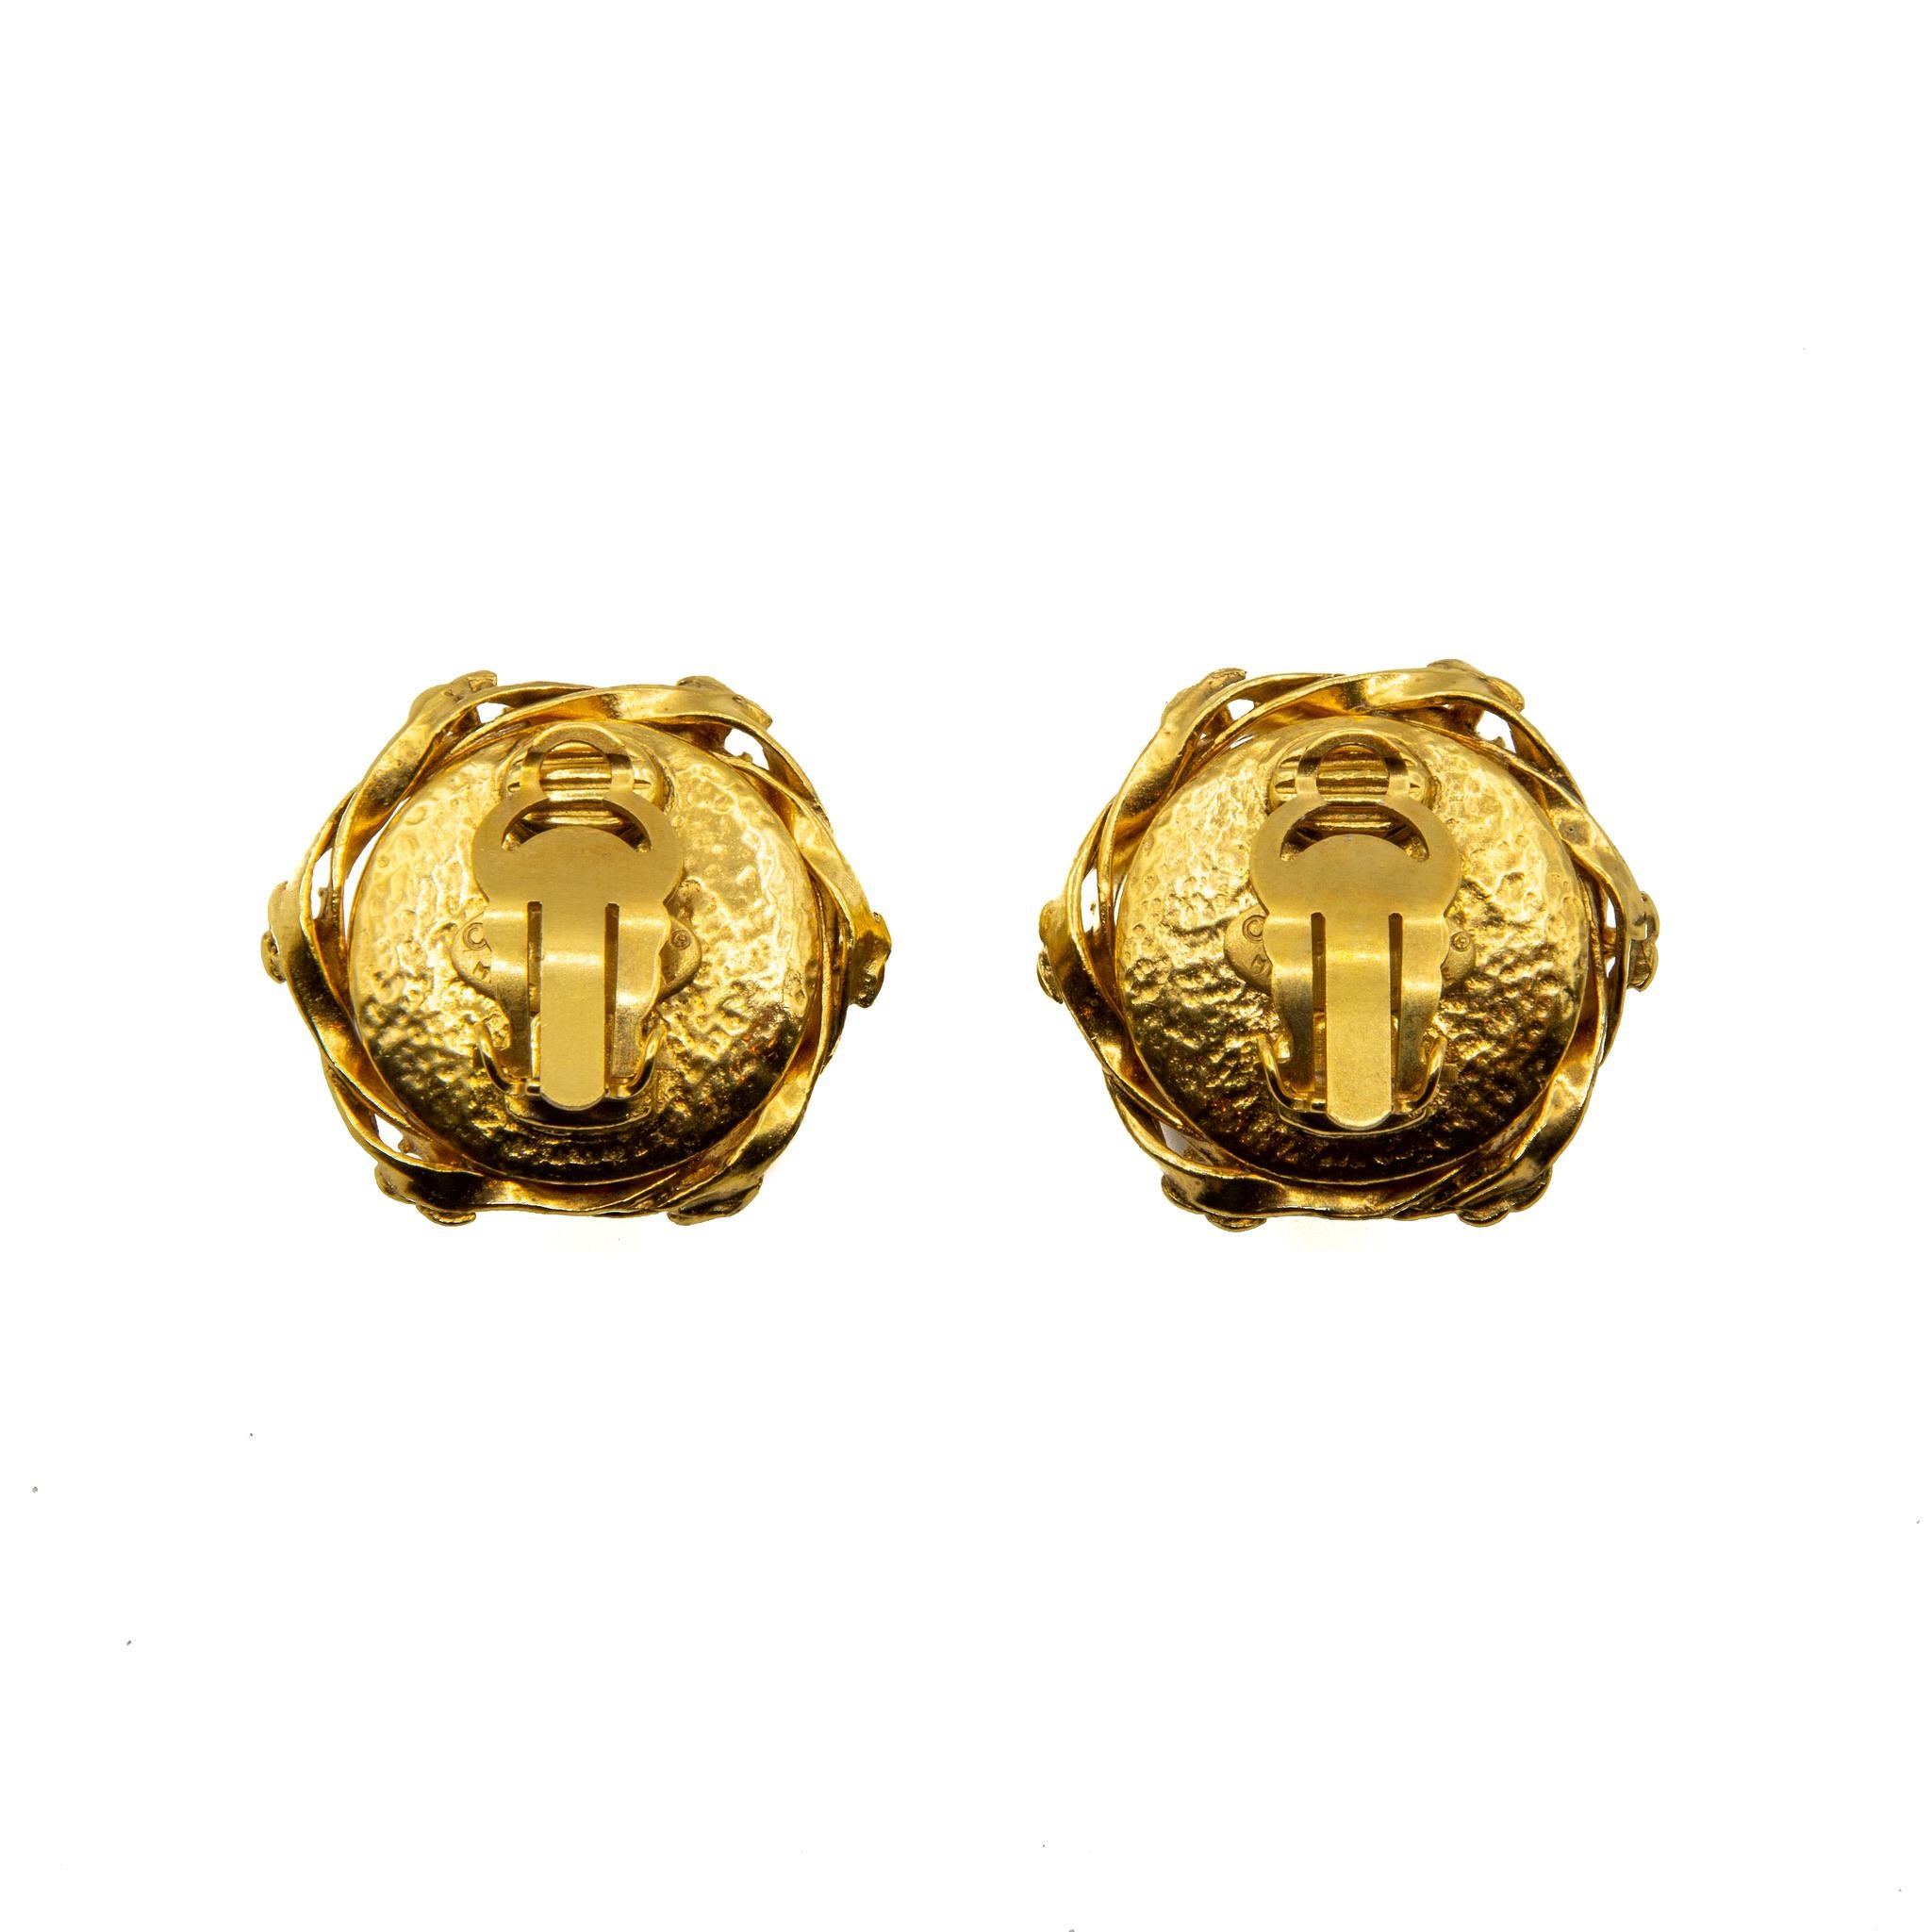 Outstanding 1995 Faux Pearl and Gilt Metal Clip-on Earrings. These earrings feature a large central faux pearl with 6 House logos woven around the edge with gold coloured gilt metal. This piece features the Chanel authenticity plaque. Provenience